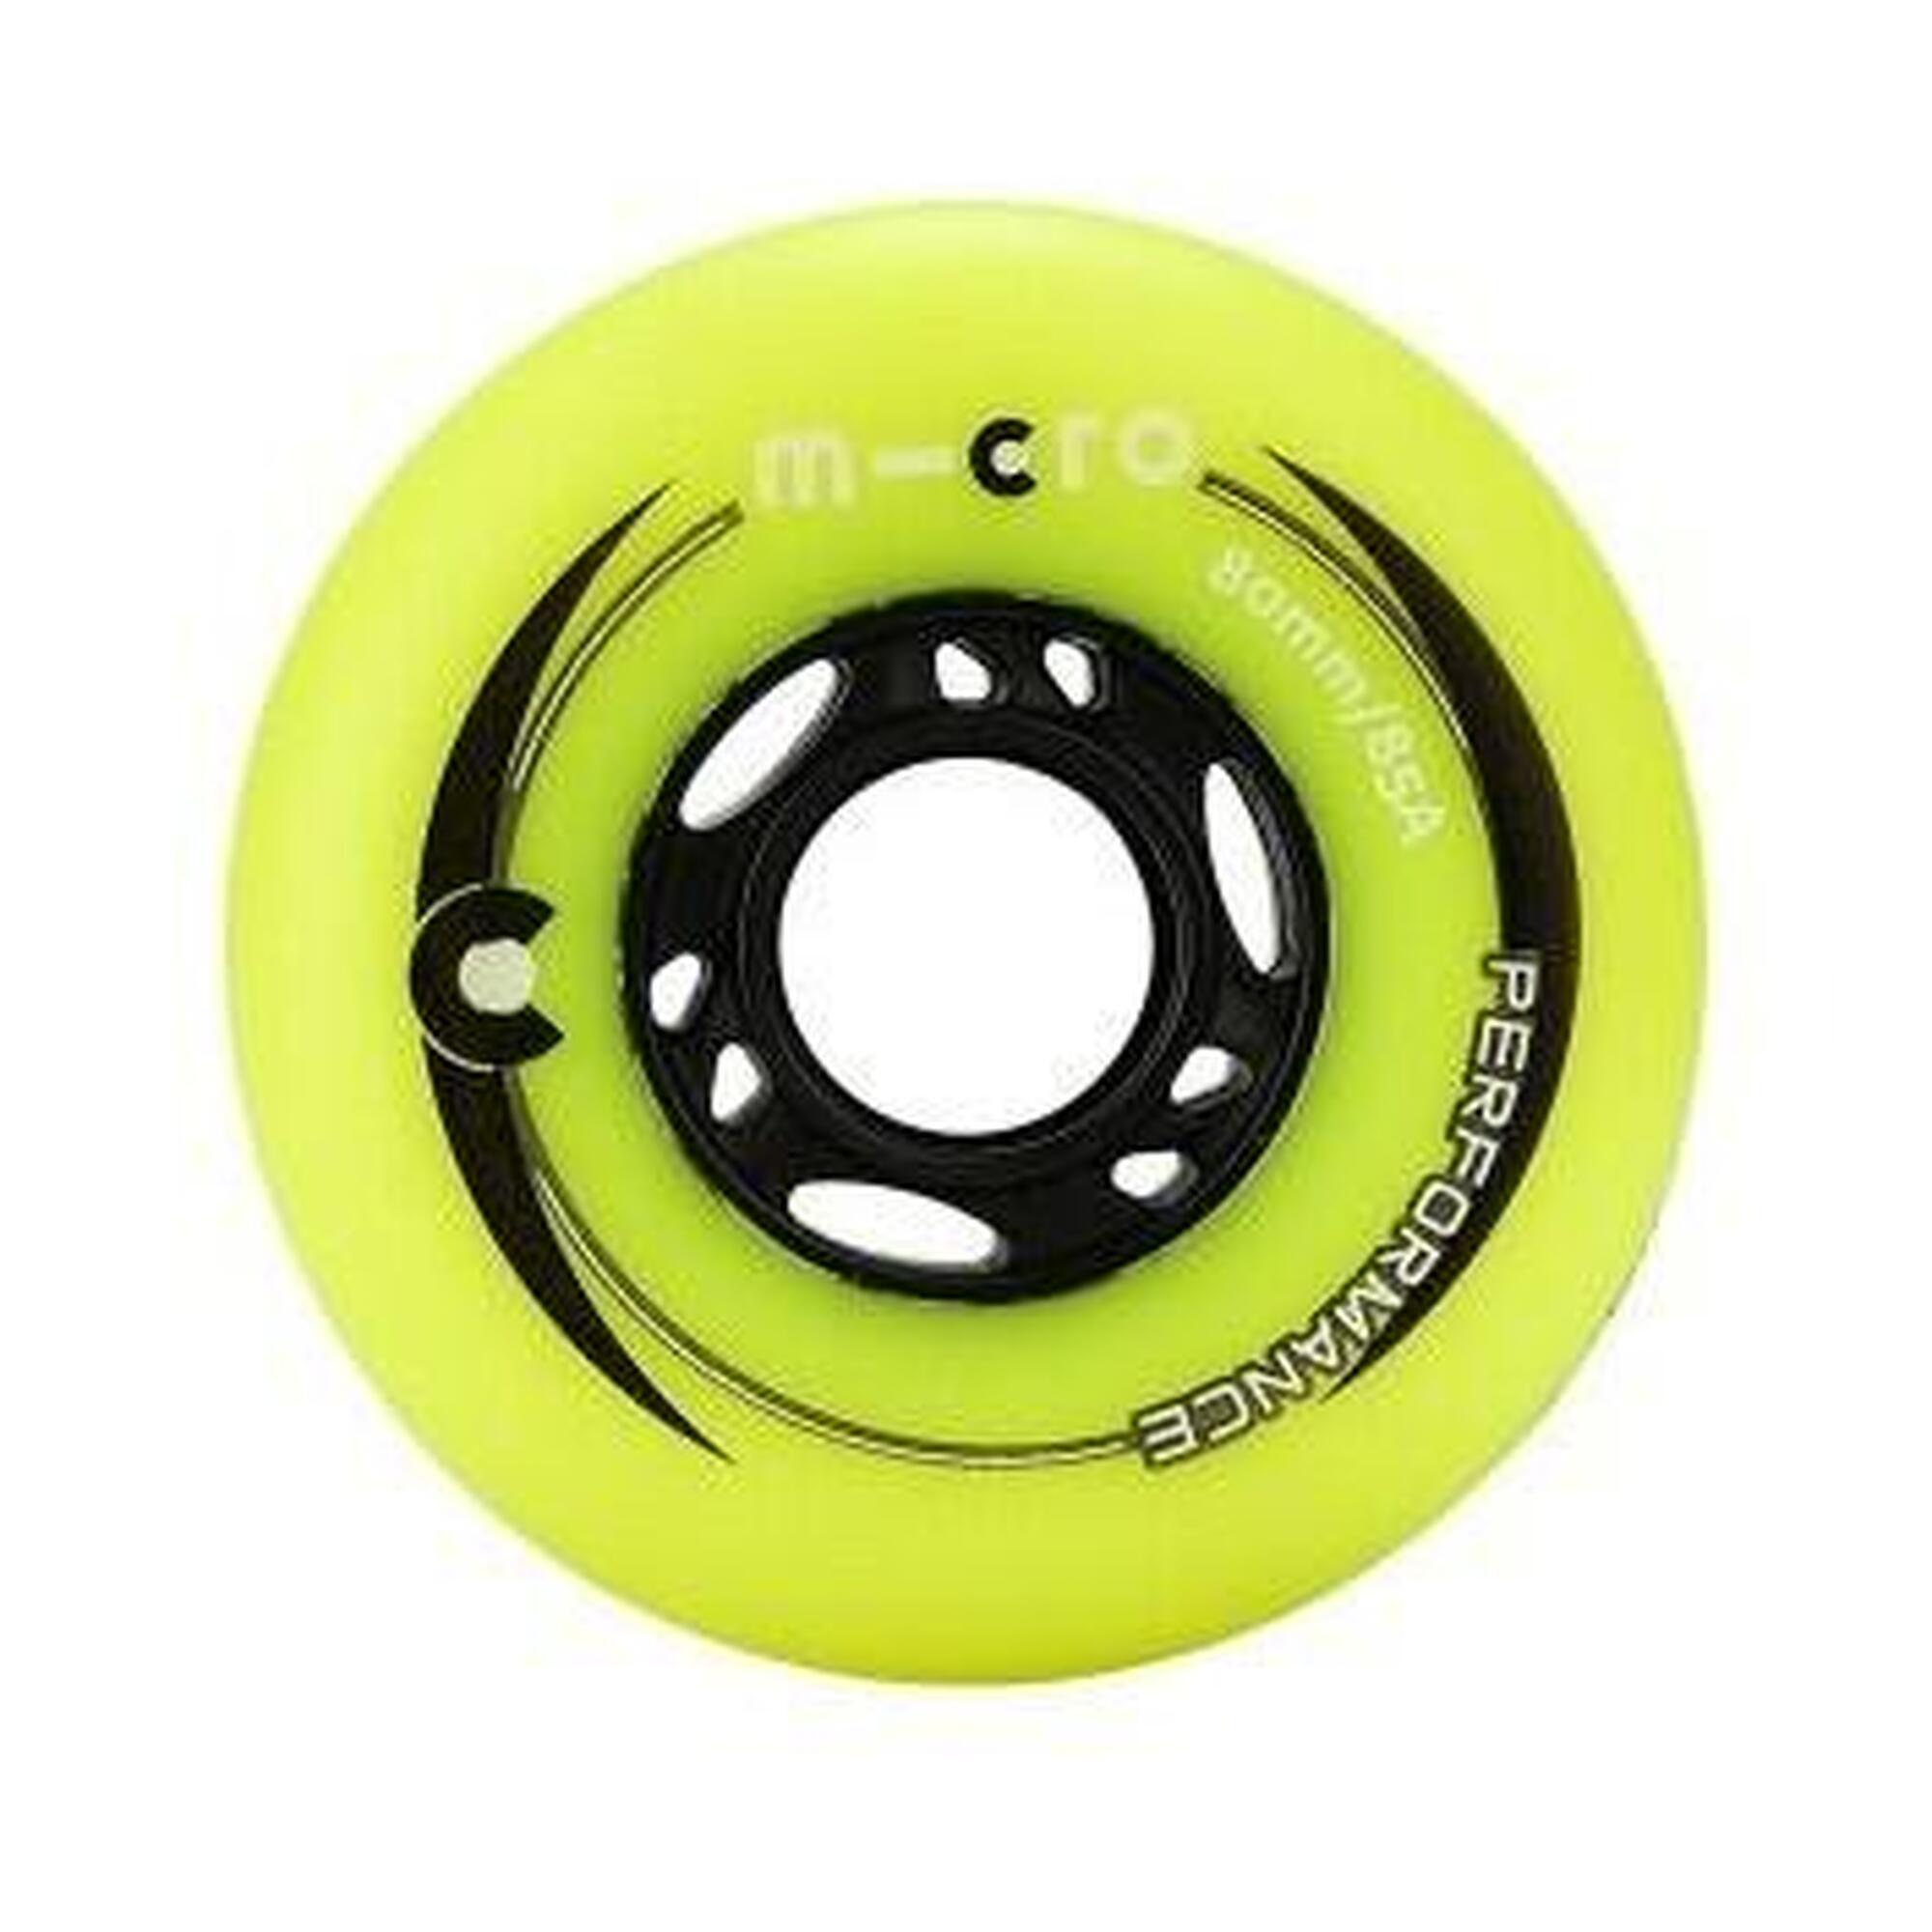 MICRO SKATE PERFORMANCE WHEELS - 80MM/85A YELLOW 4 PACK 80 MM